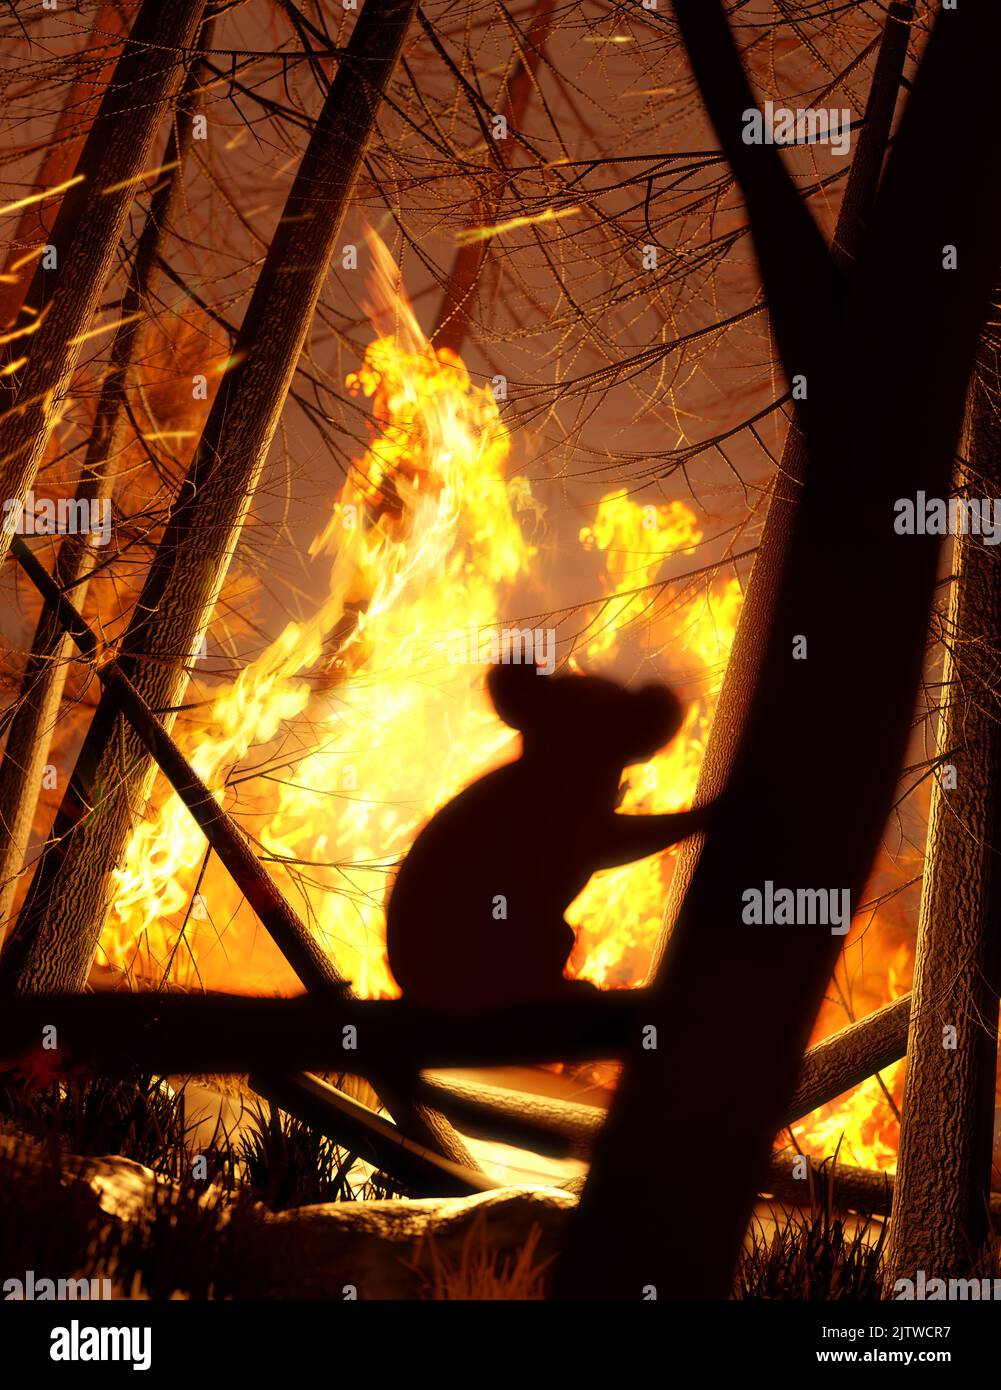 A koala bear watching and escaping a forest fire destroying its natural habitat. Climate change and extreme weather events 3D illustration. Stock Photo